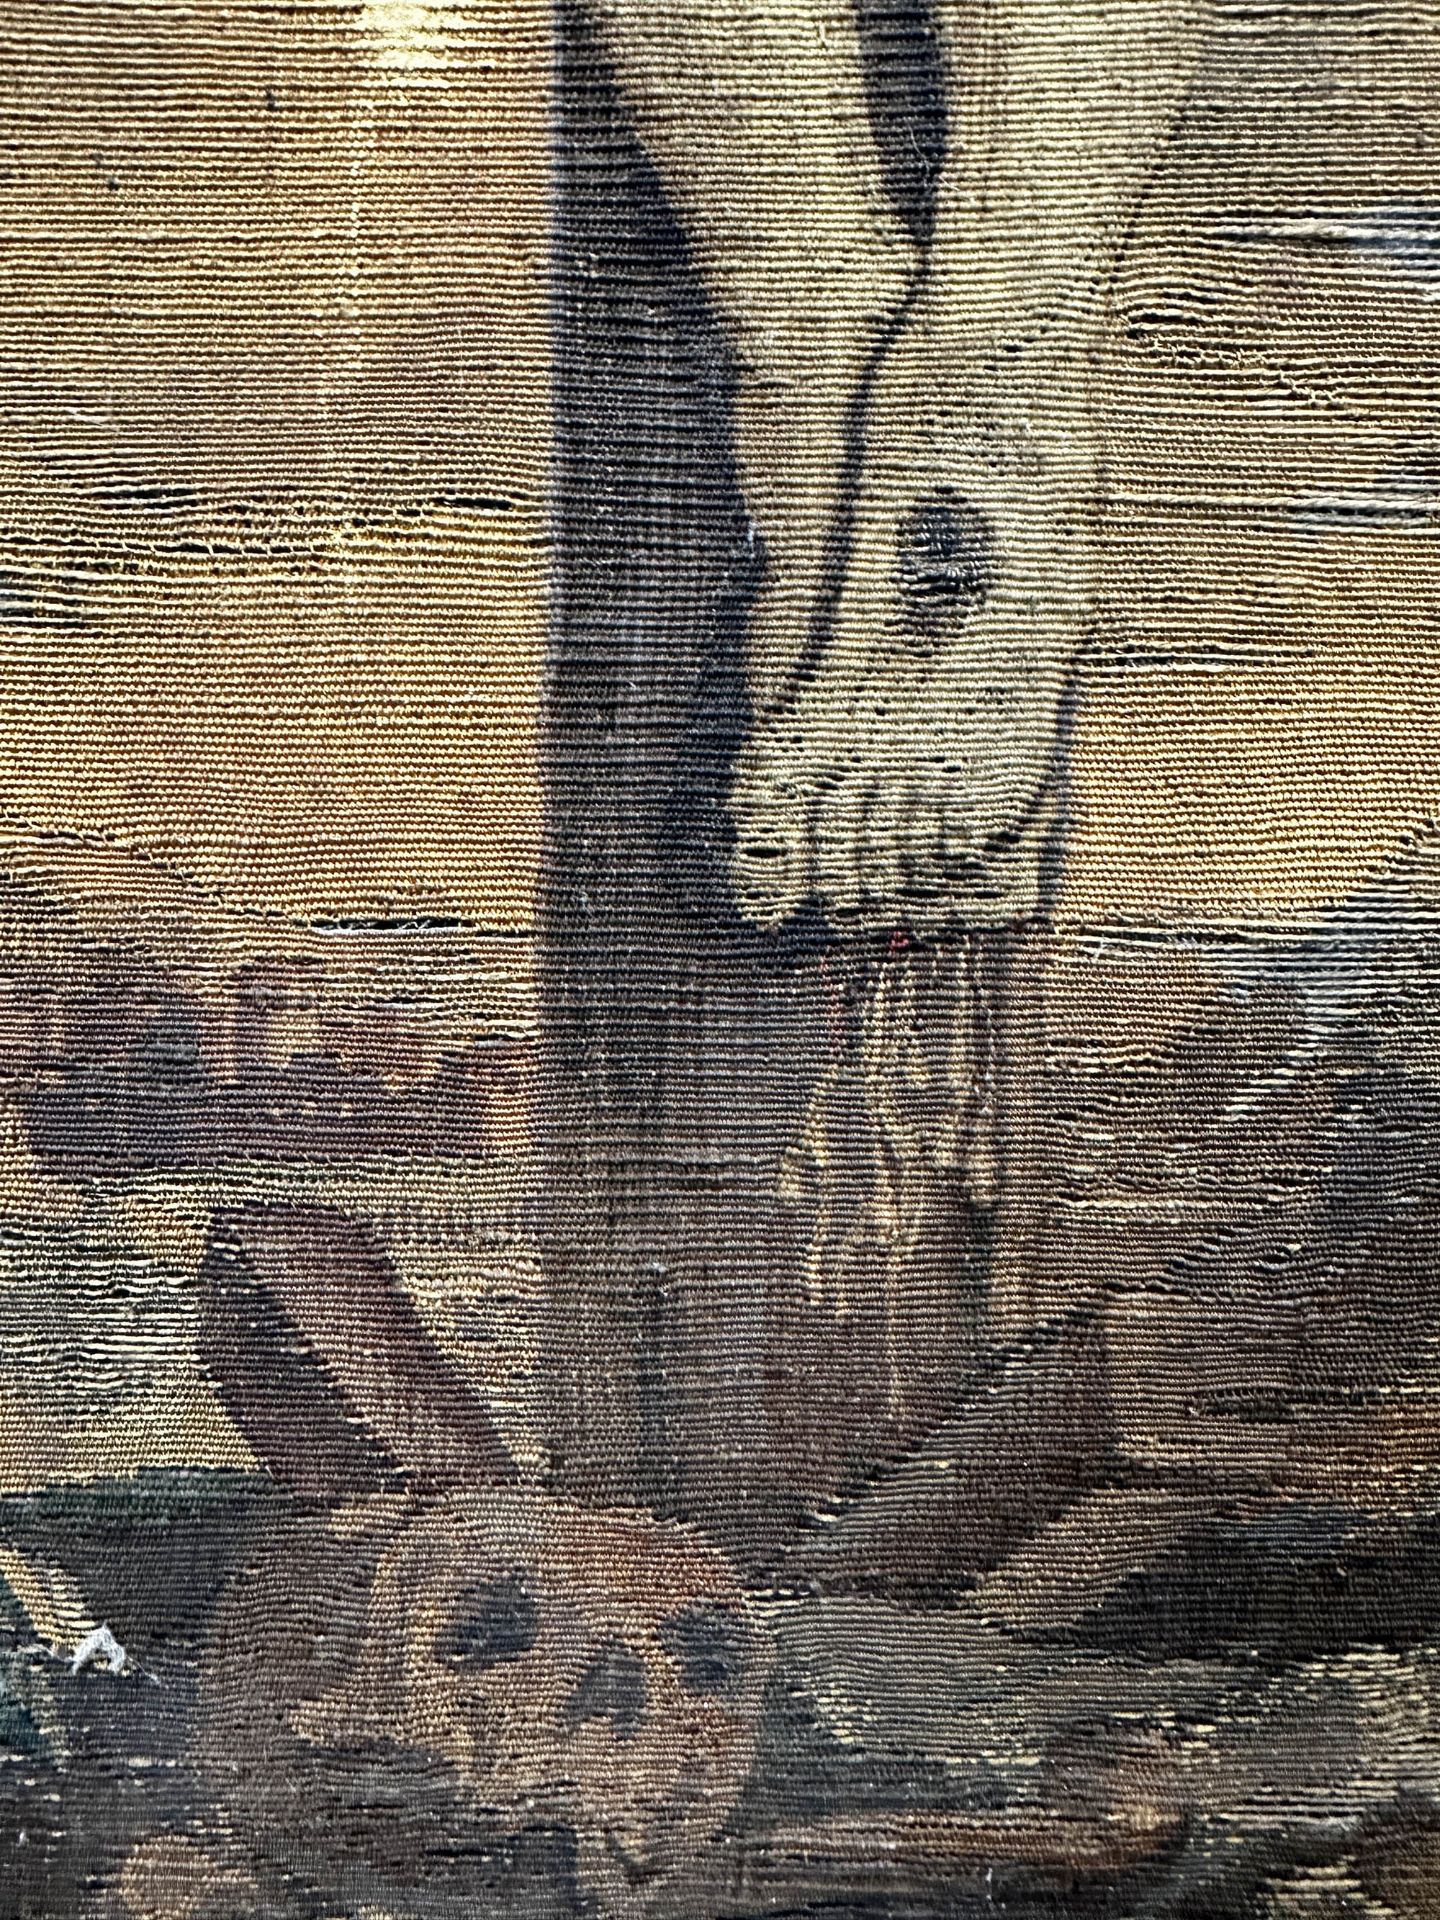 Tapestry. Probably 17th century. Jesus on the cross. ''Brugg''. - Image 9 of 11